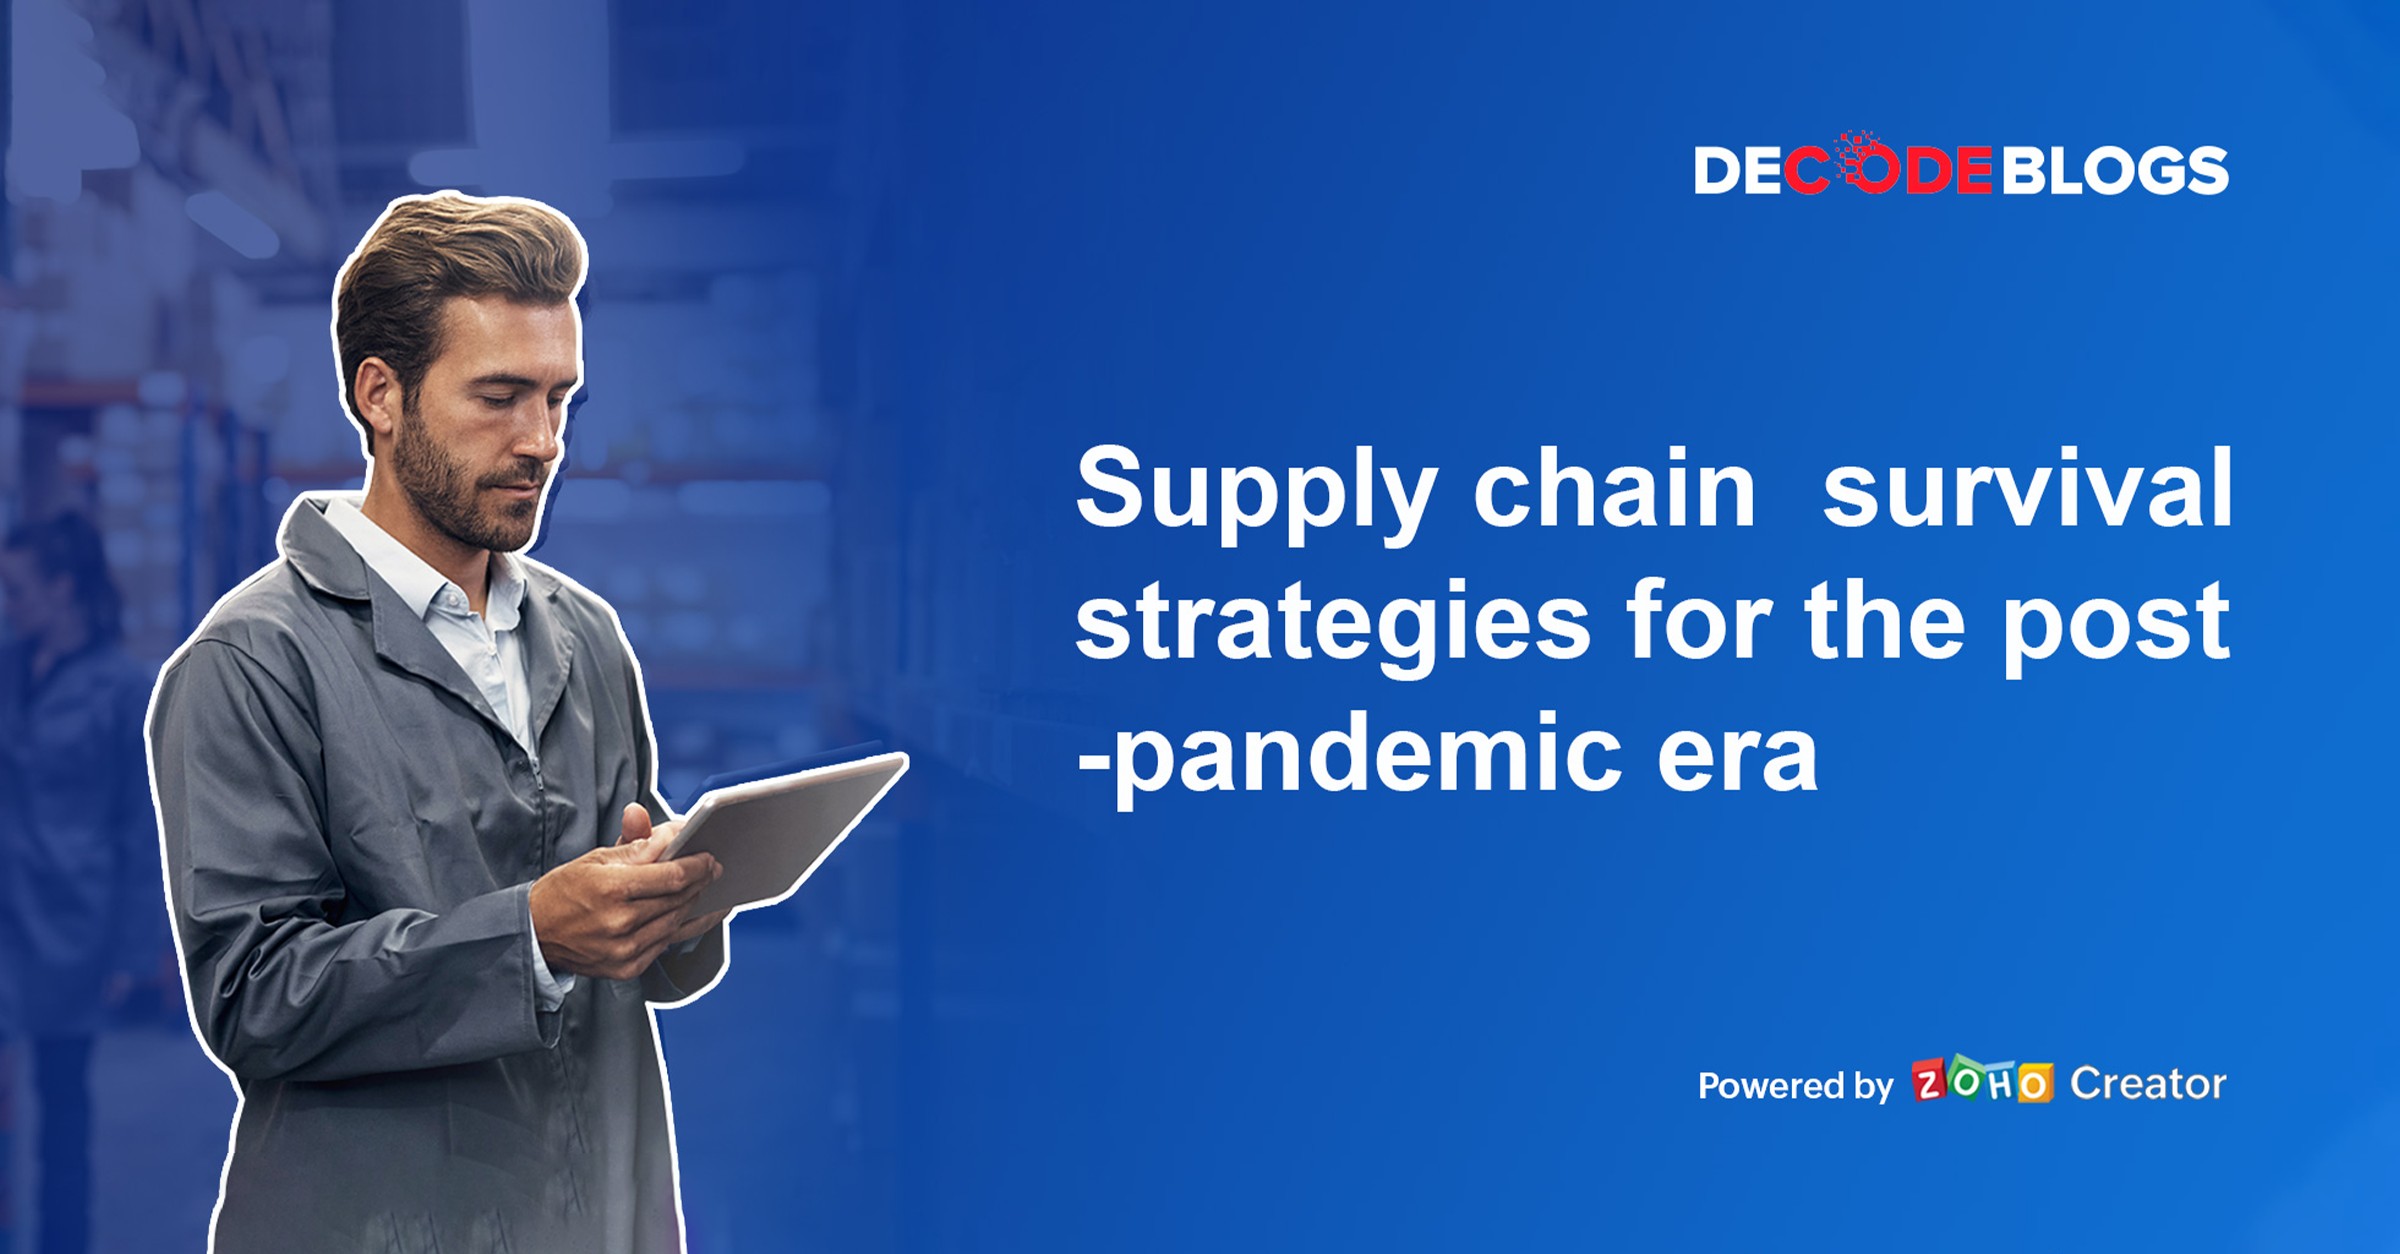 Supply chain survival strategies for the post-pandemic era